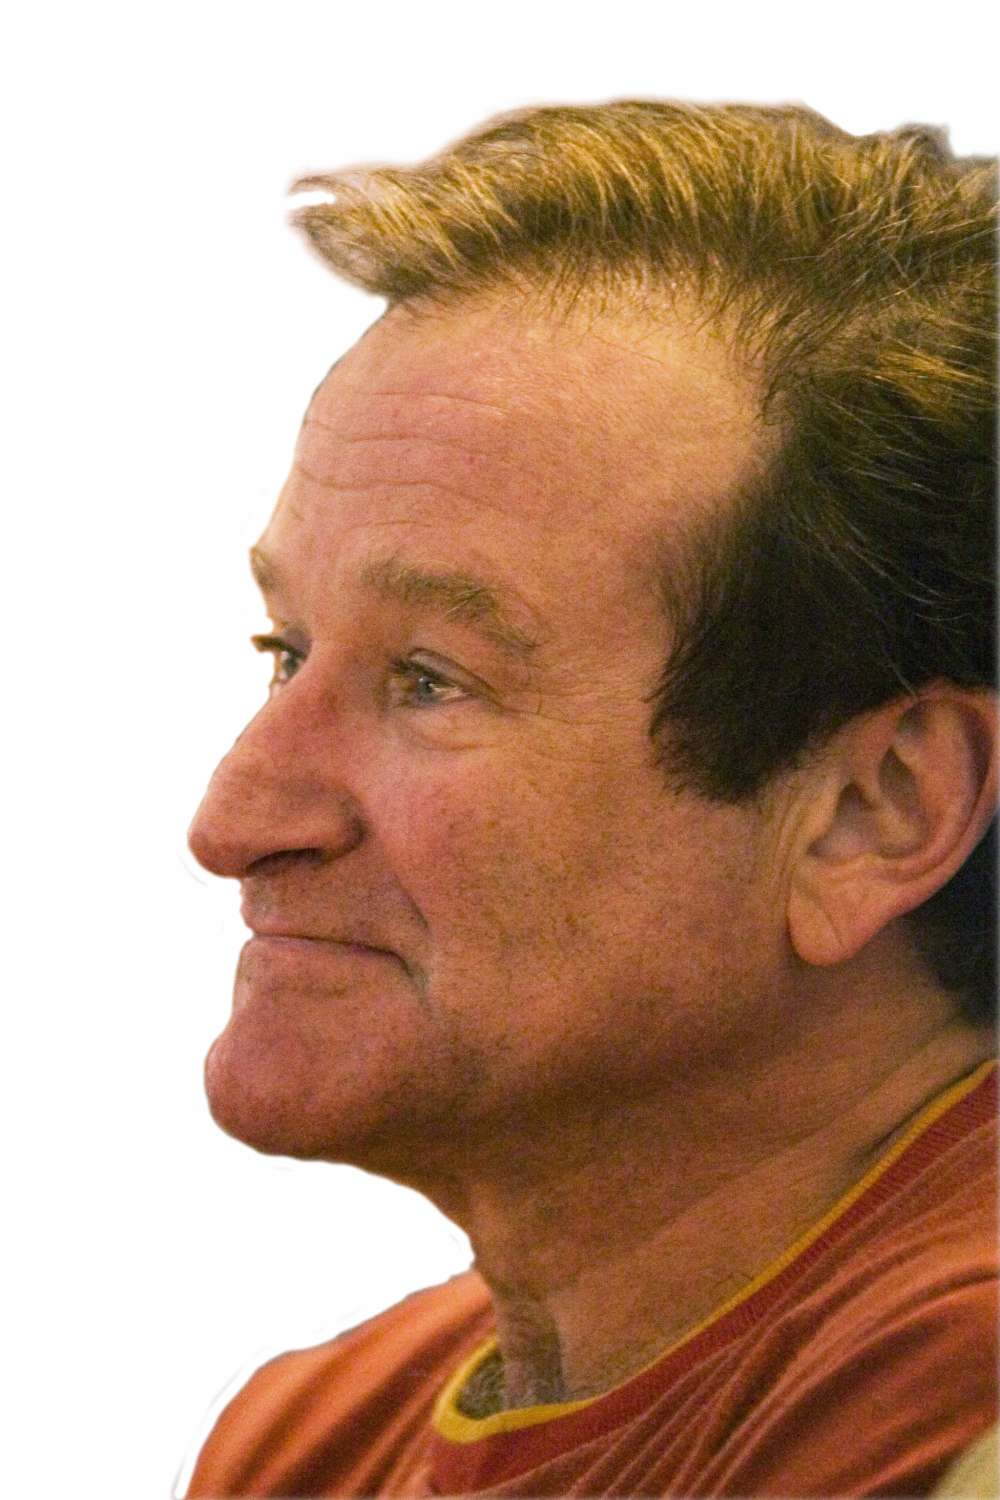 Robin Williams: The inner battle fought and lost